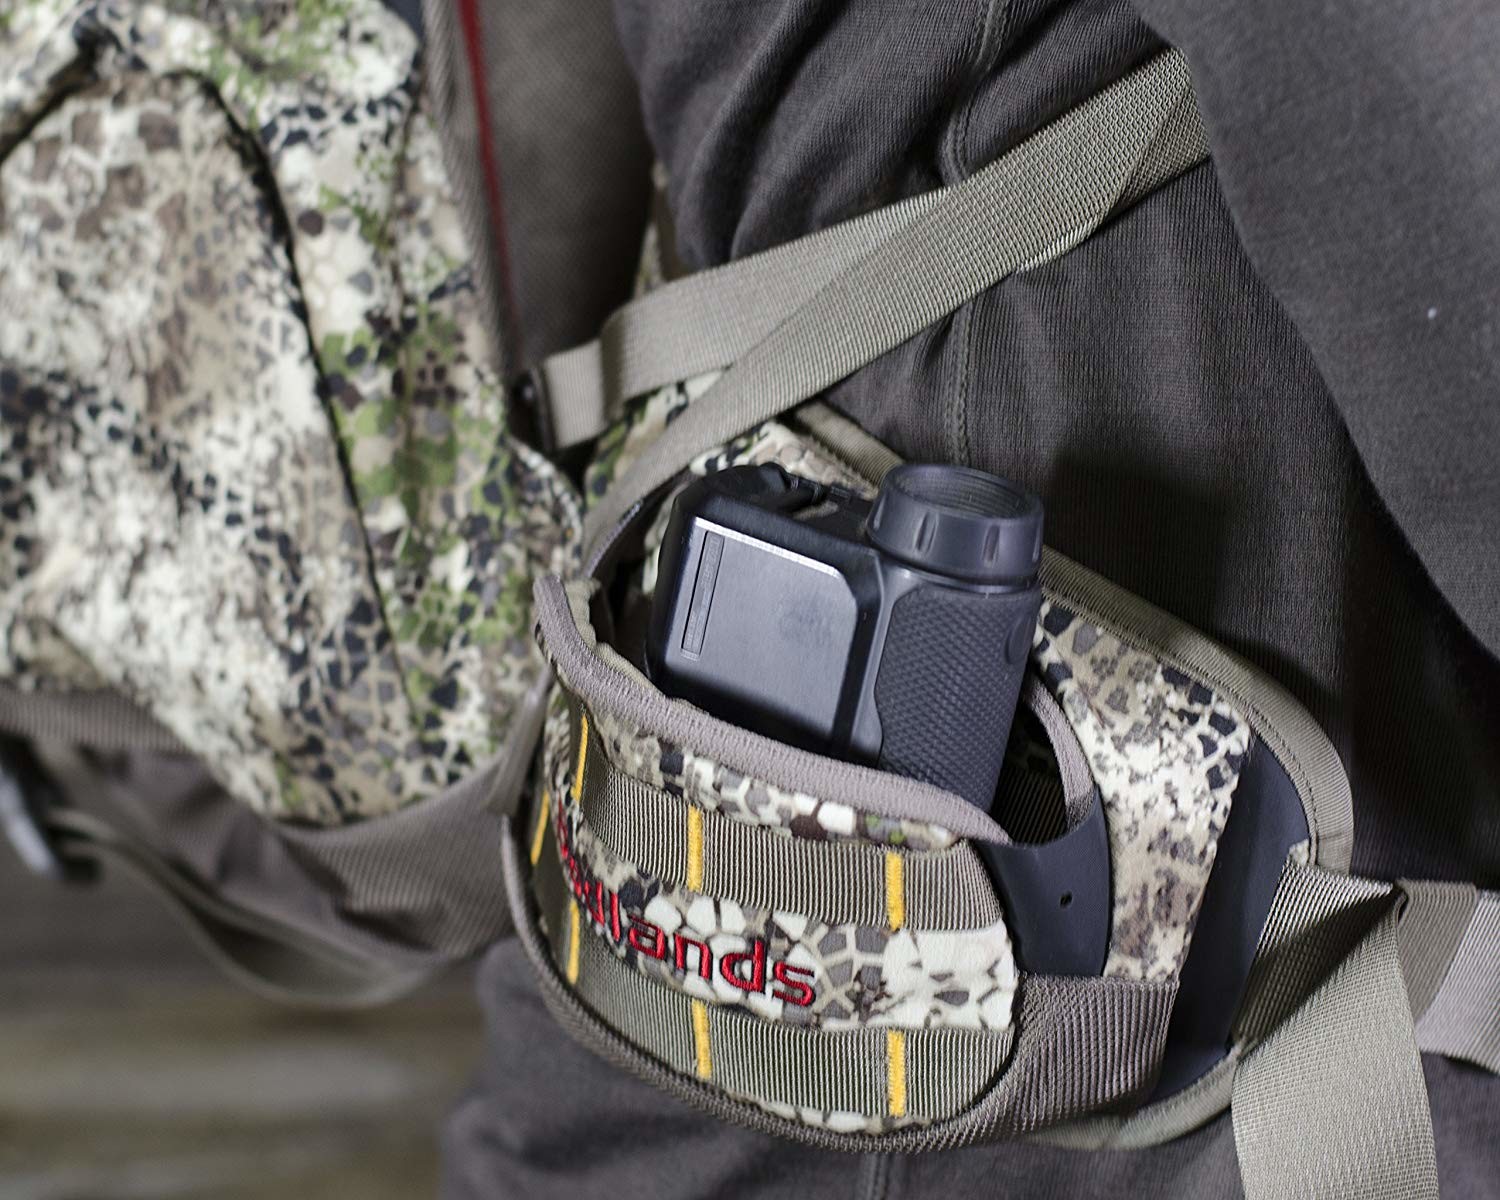 Badlands 21-12876 Diablo Dos Approach Camo Hunting Pack - image 4 of 5